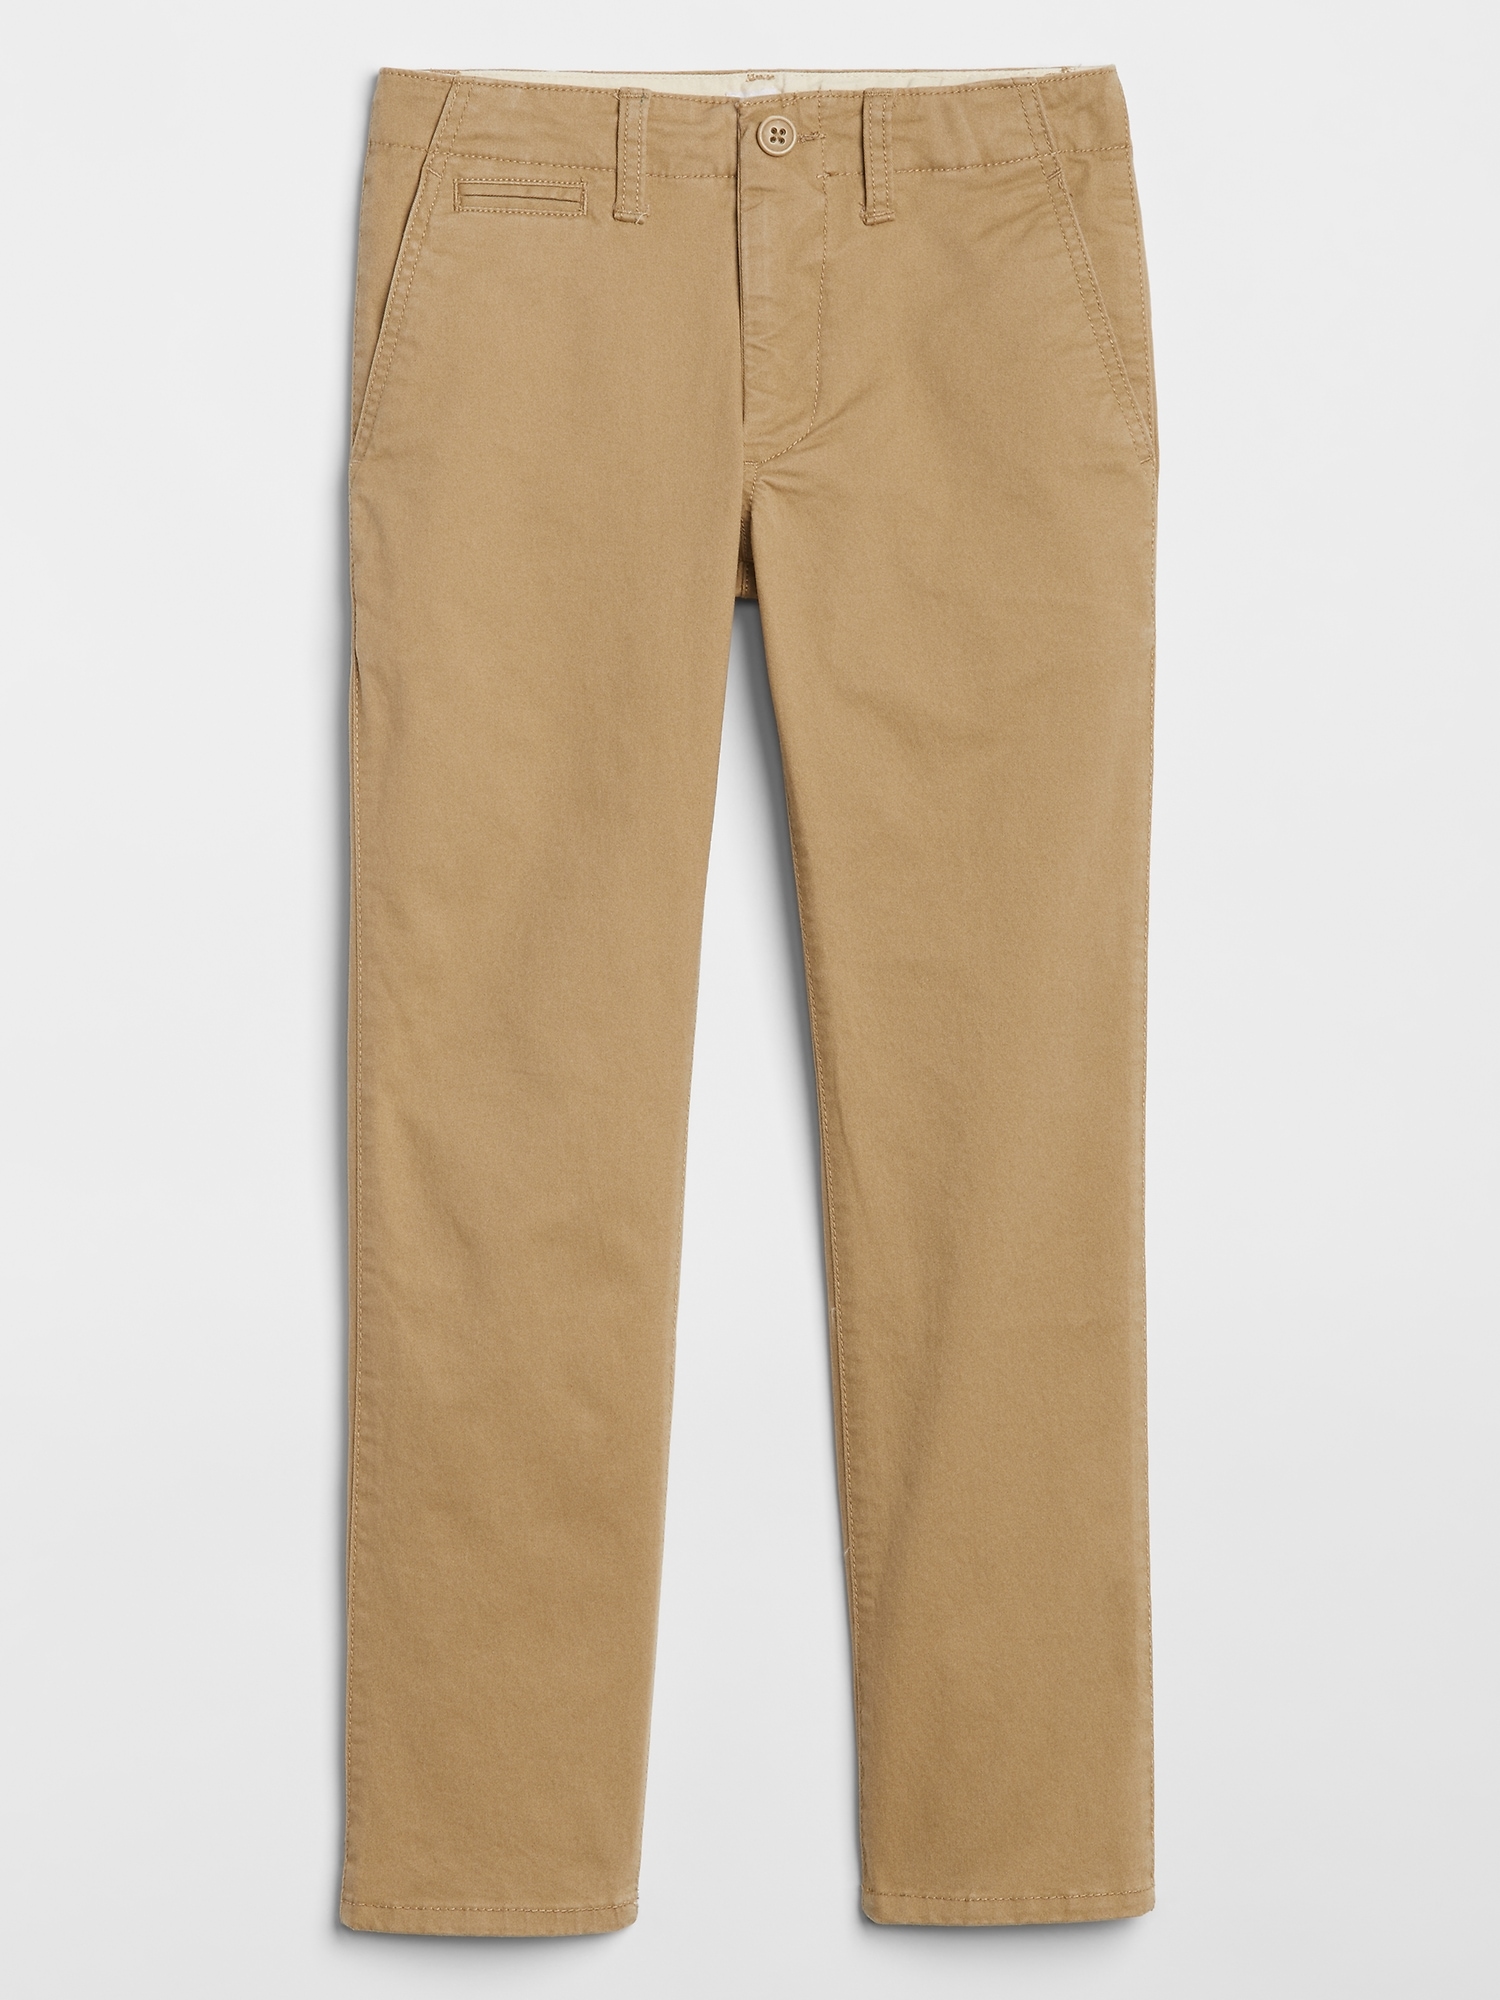 Pleated Trousers | Gap Factory